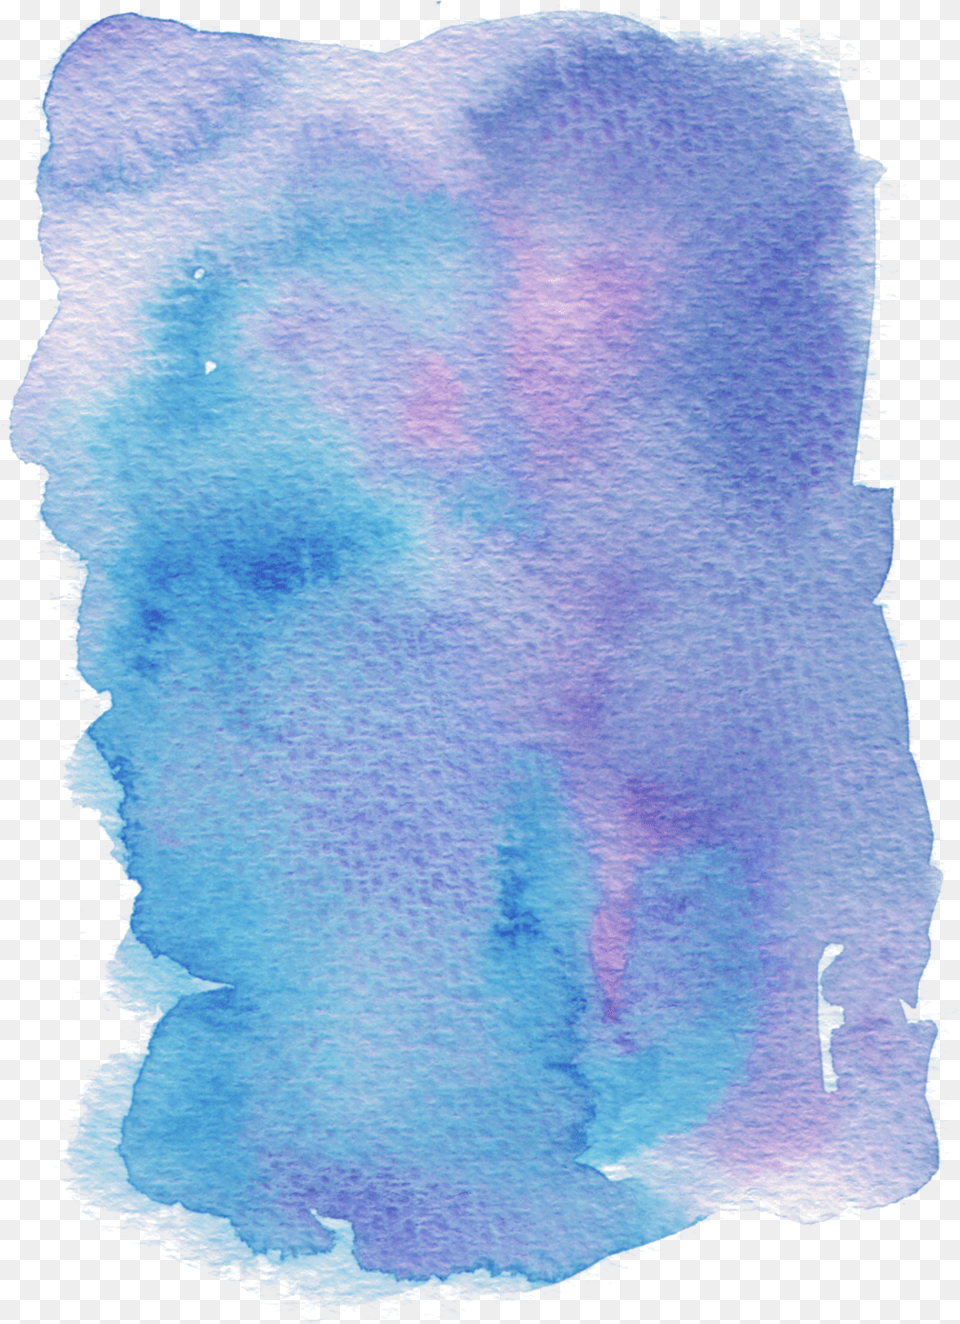 Download Watercolor Blue Painting Effect Photo Watercolor Effect Free Transparent Png